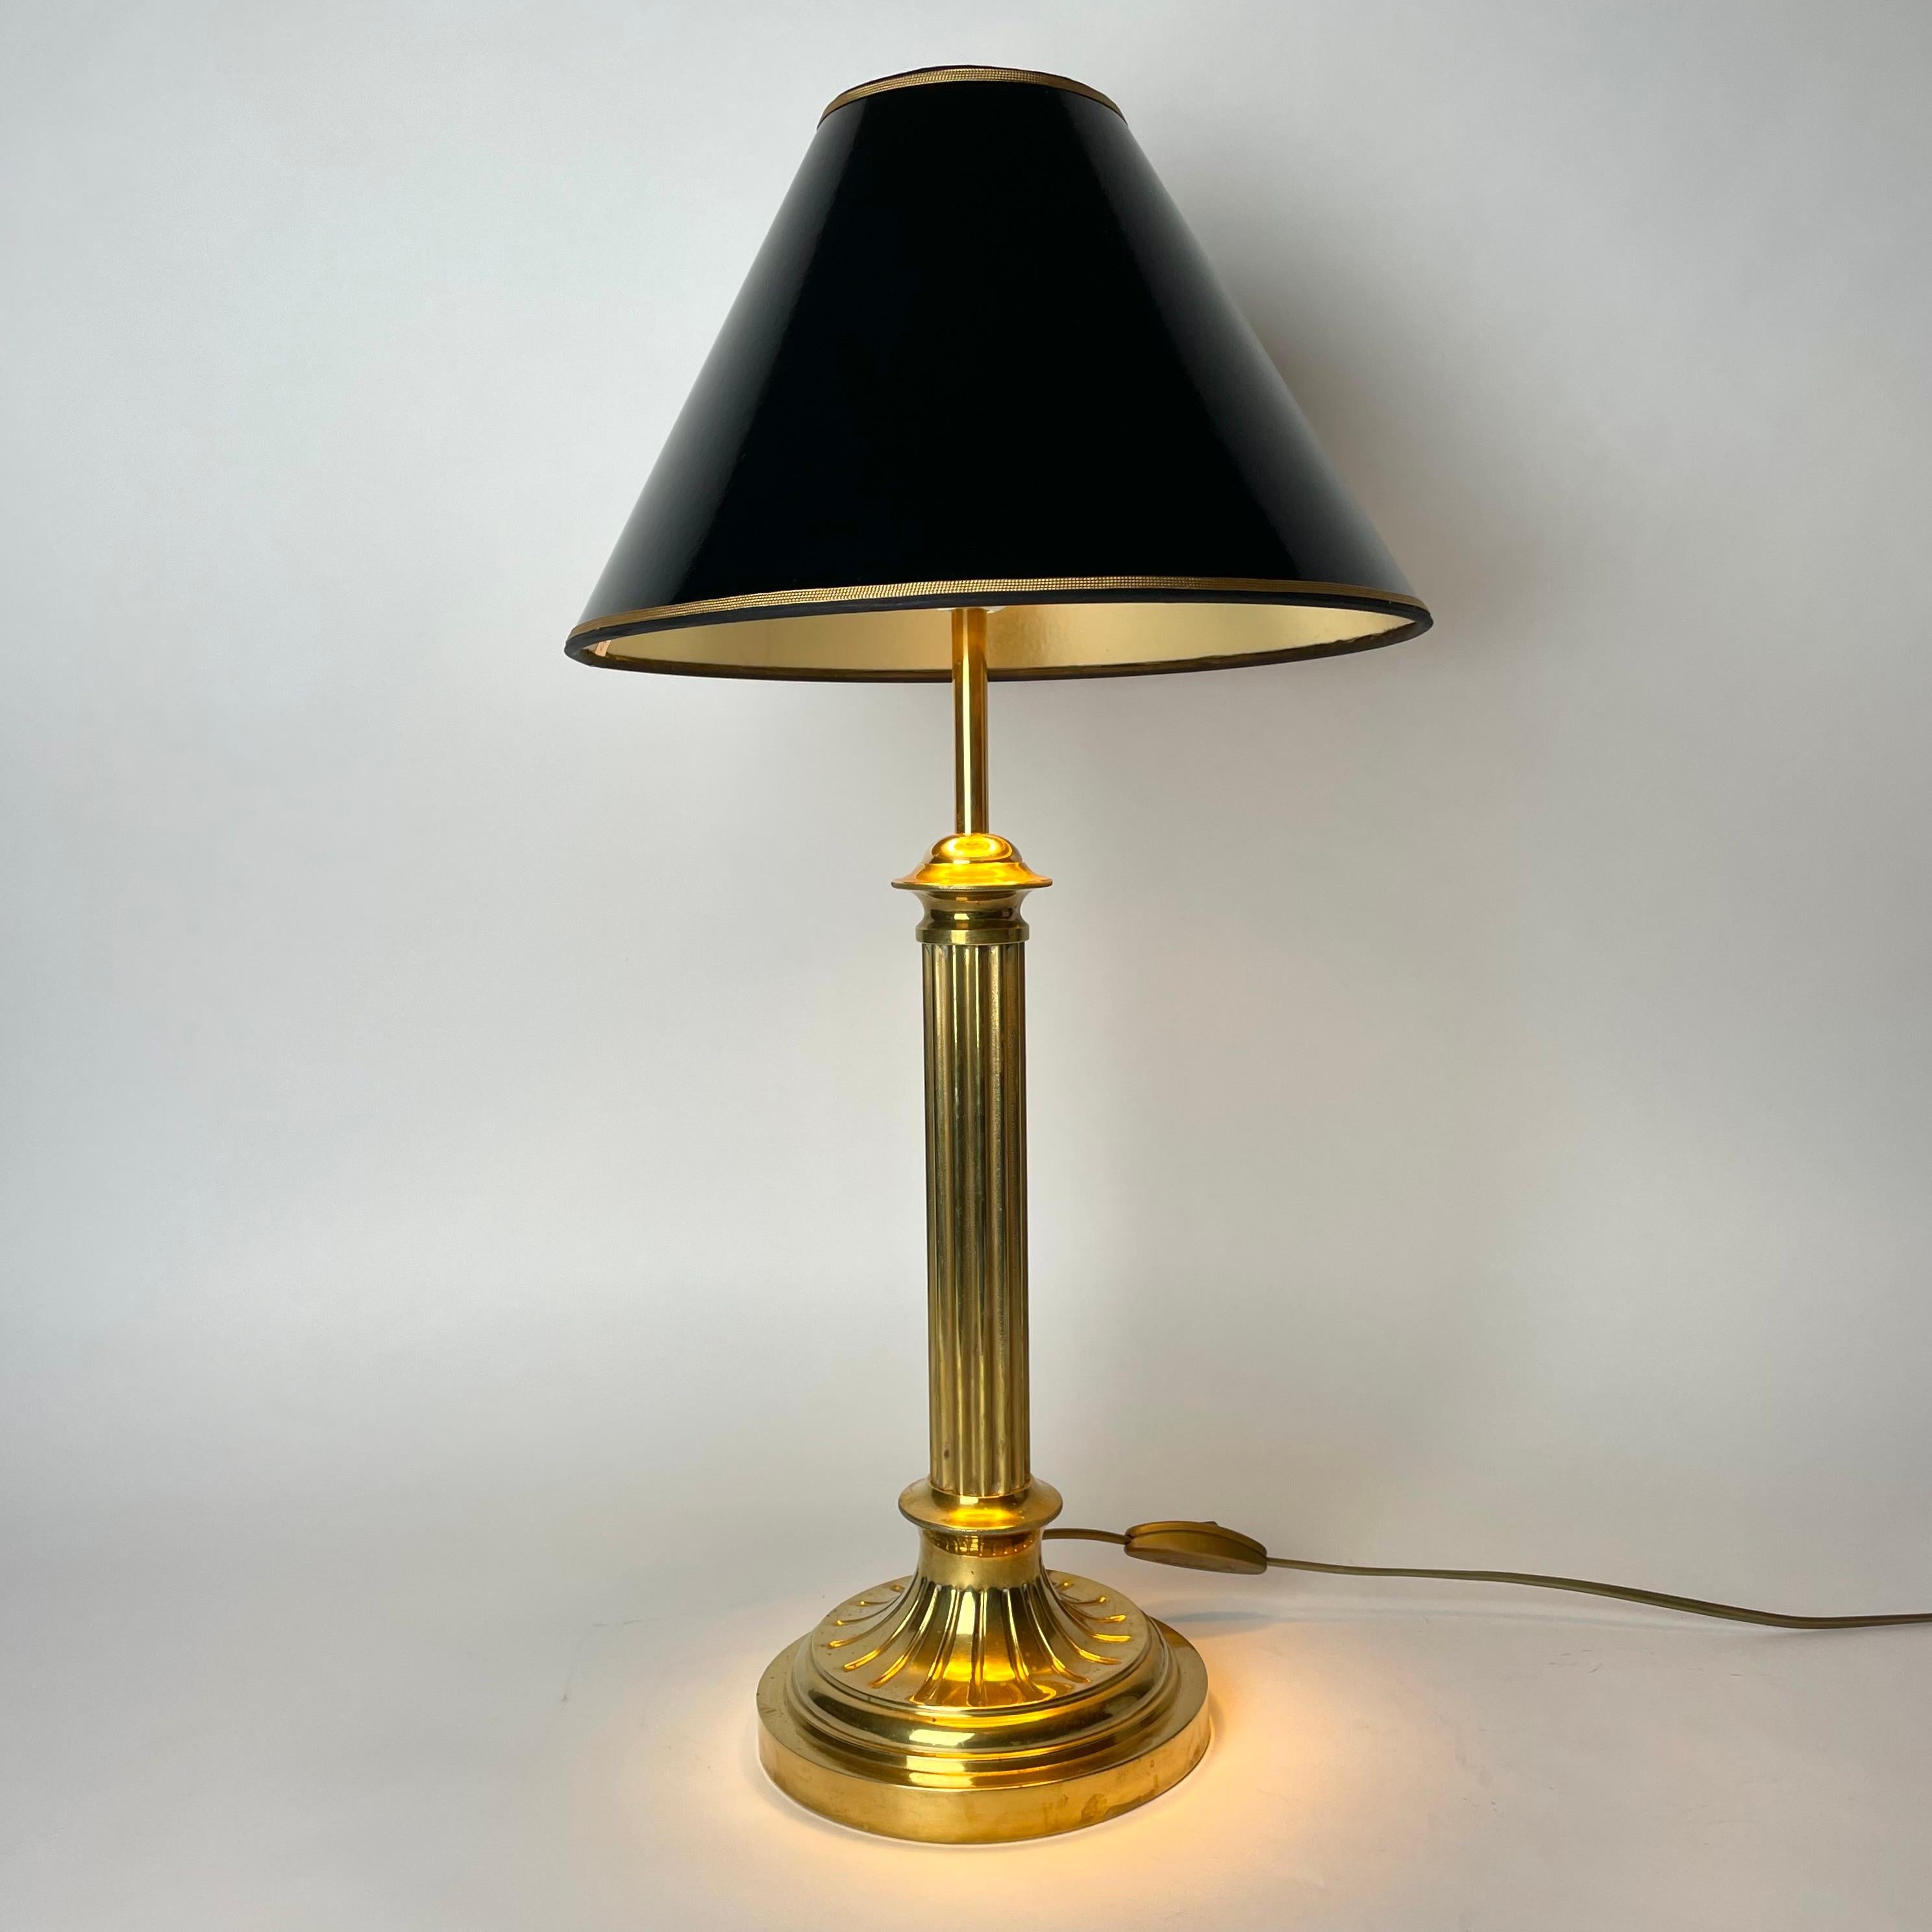 Sophisticated Brass Table Lamp with Classic column made during the late 19th Century. Originally a kerosene lamp converted to table lamp in the early 20th Century.

Newly rewired electricity 

The lampshade in black lacquer with a gilded inside to